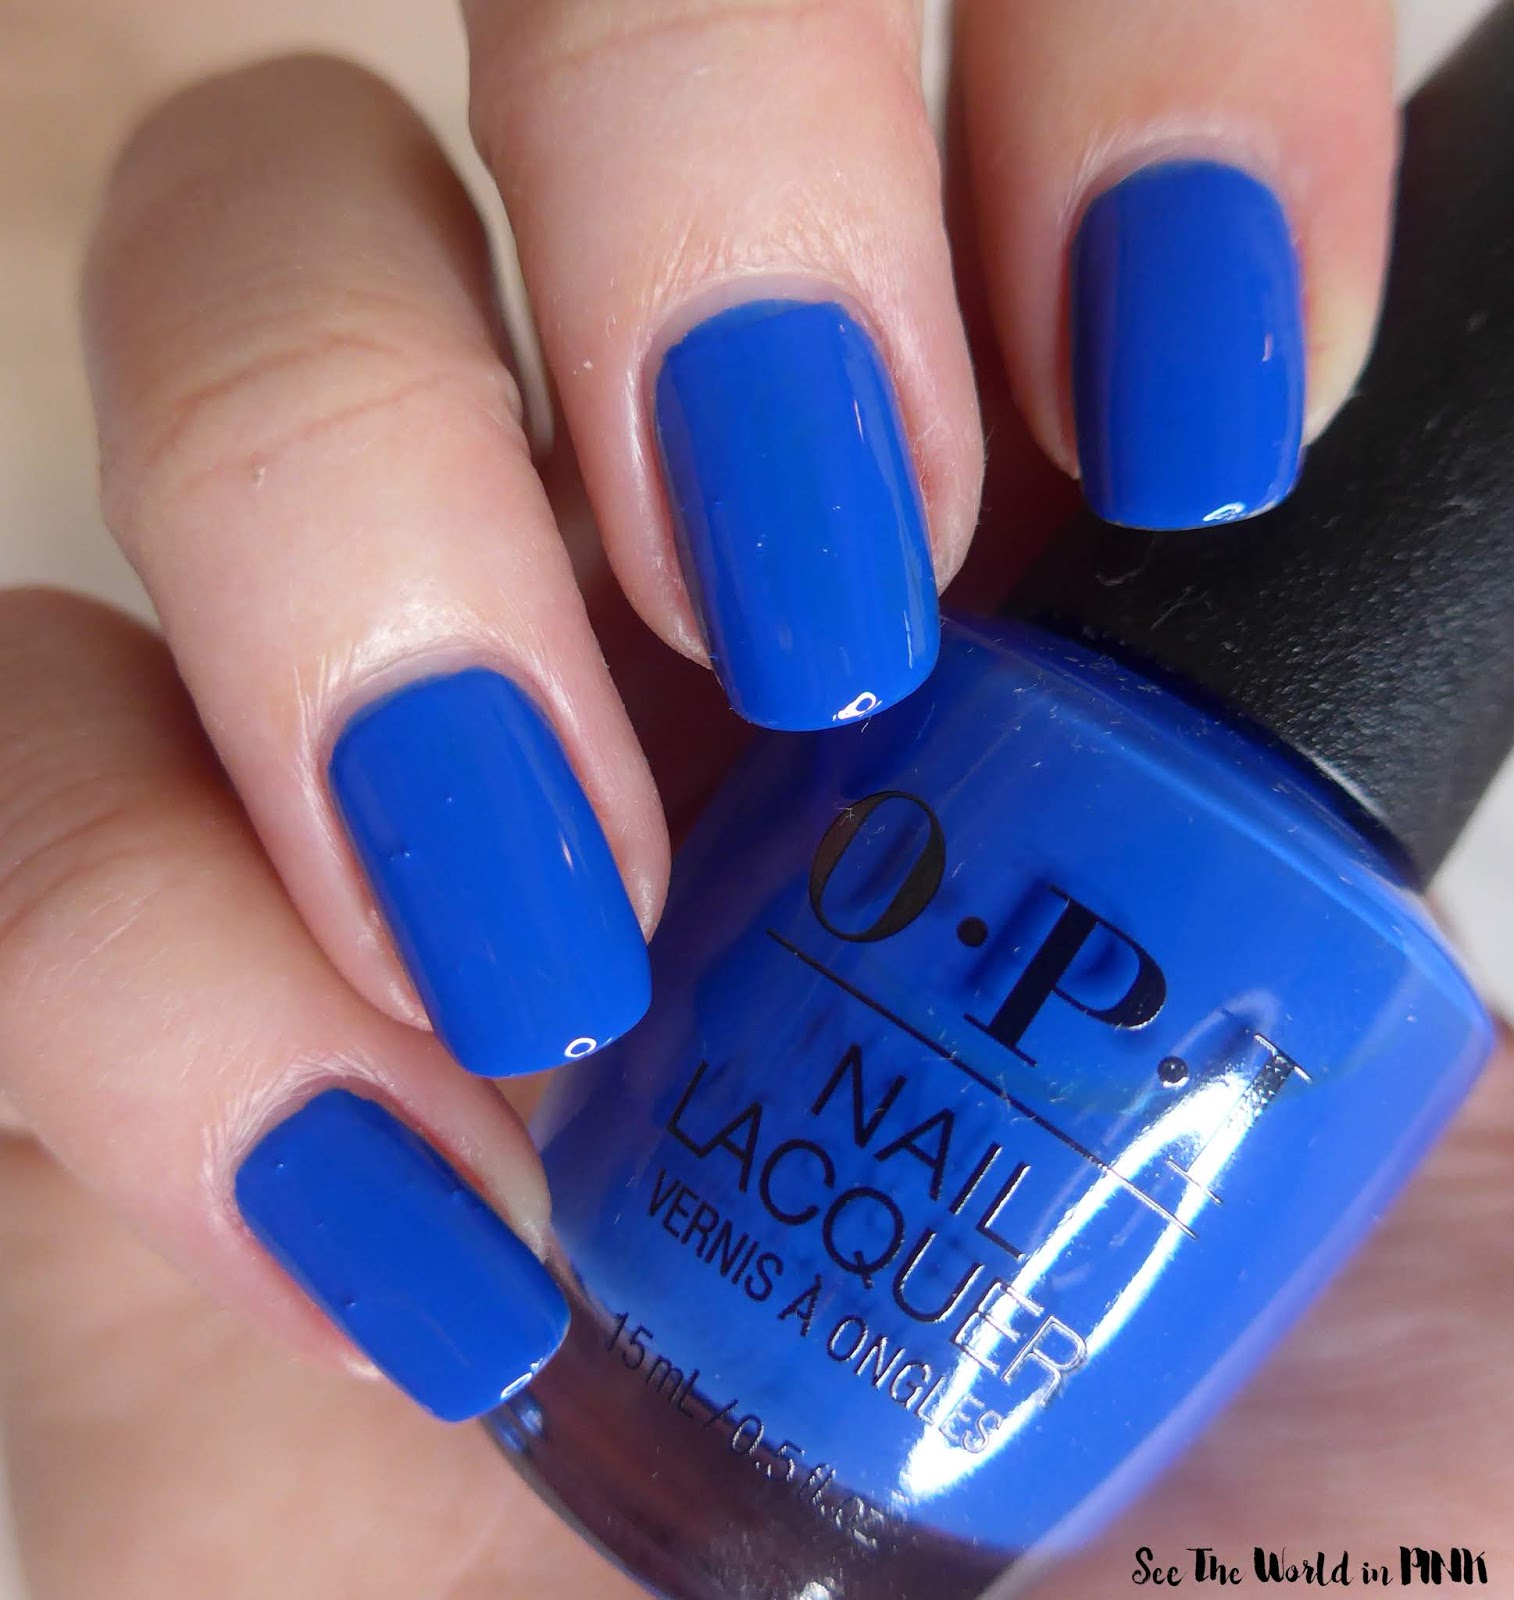 Manicure Monday - OPI Spring 2020 Mexico City Collection 